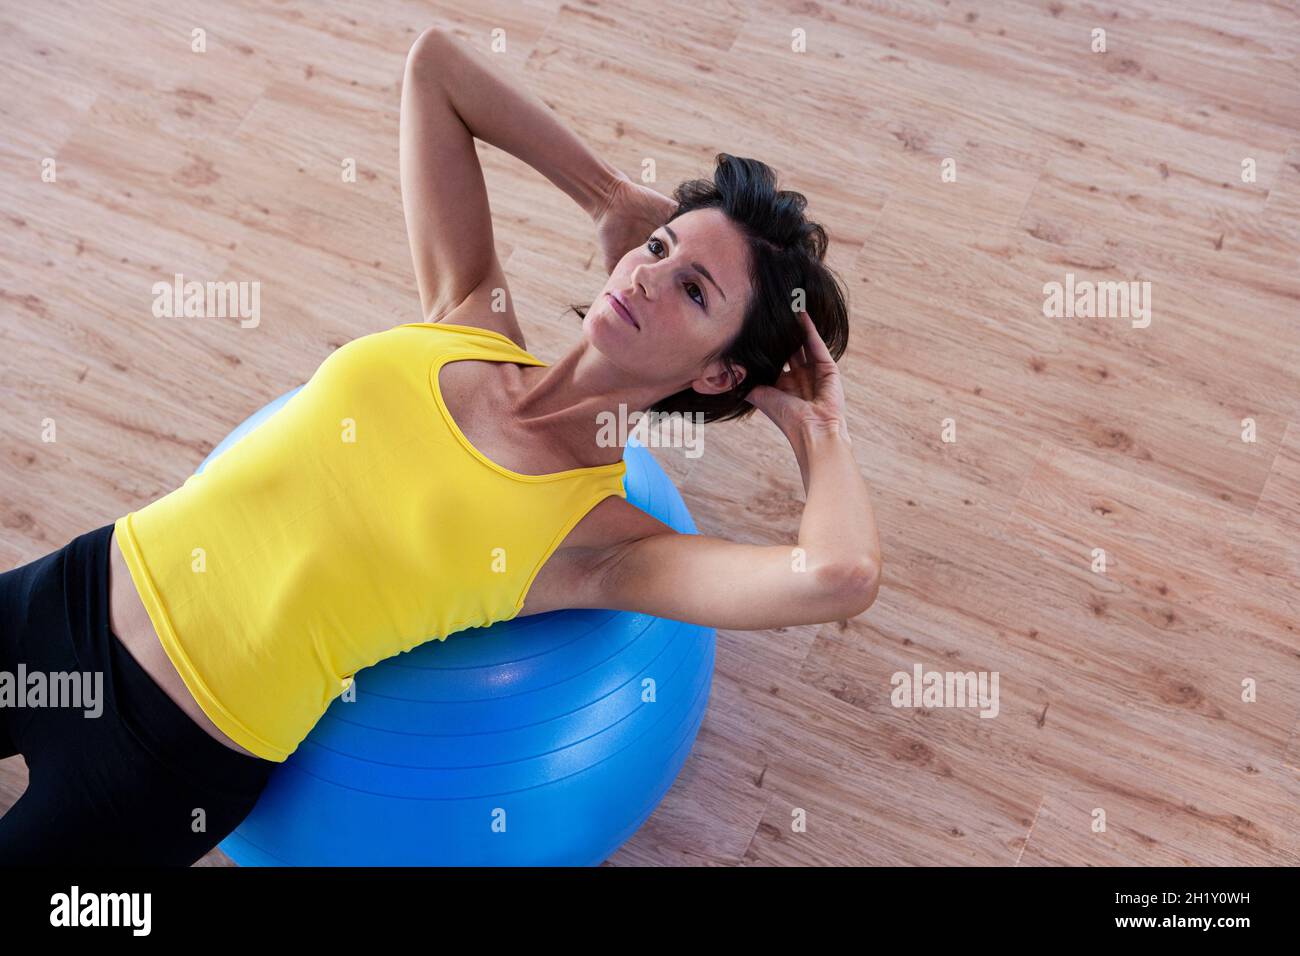 Healthy young woman working out in a gym Stock Photo